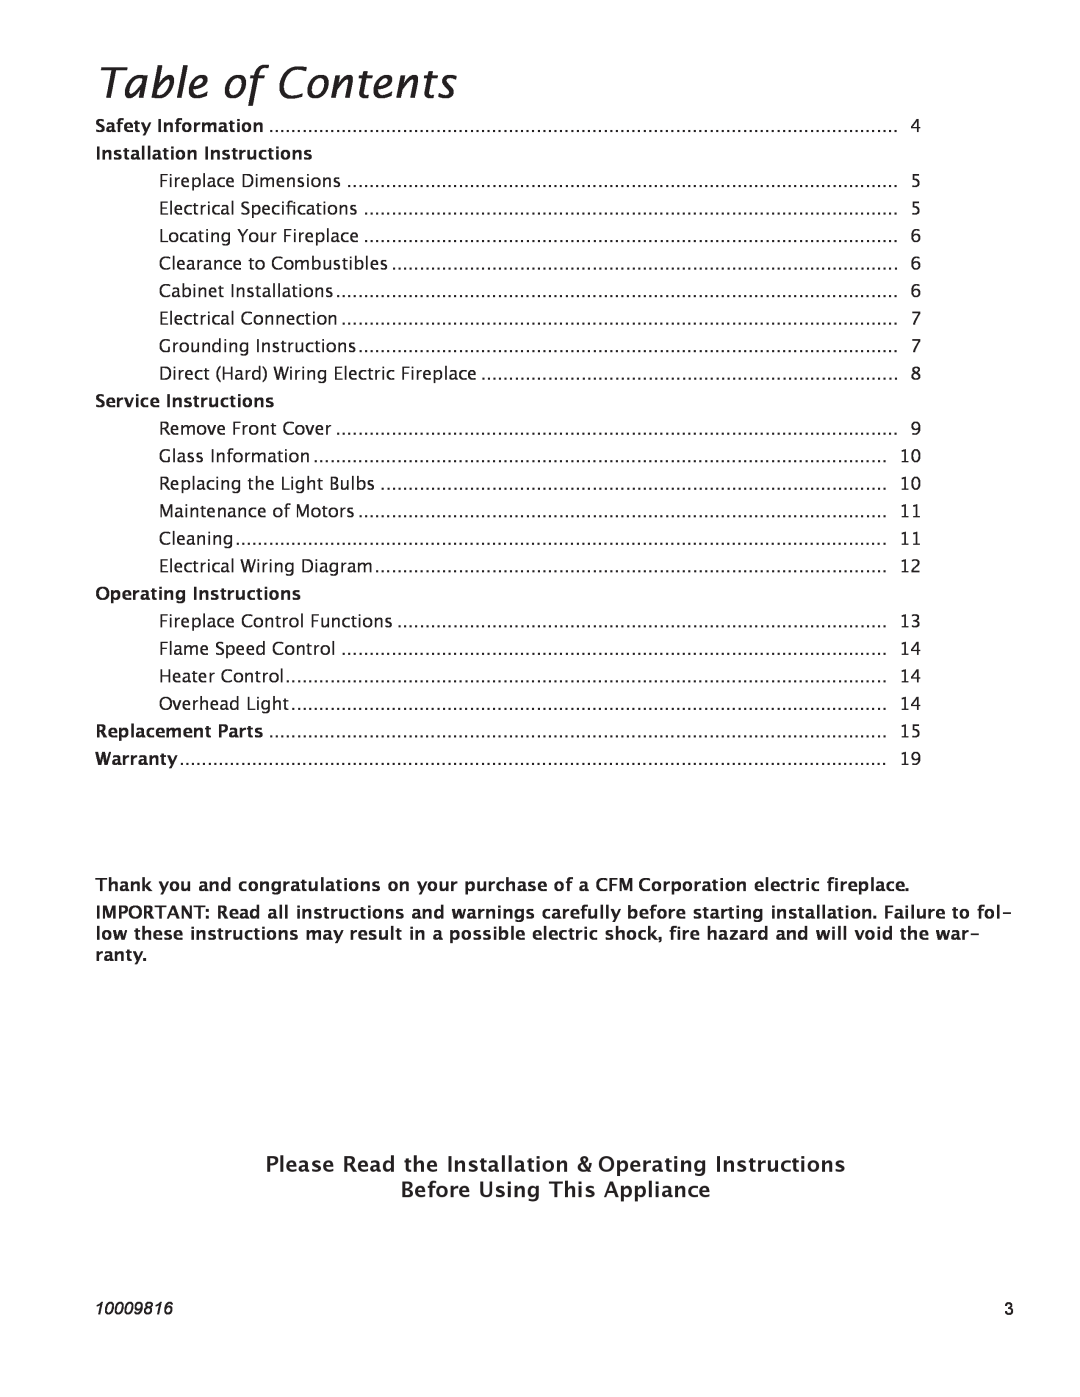 Vermont Casting EF22, EF26FG operating instructions Table of Contents, Before Using This Appliance, 10009816 